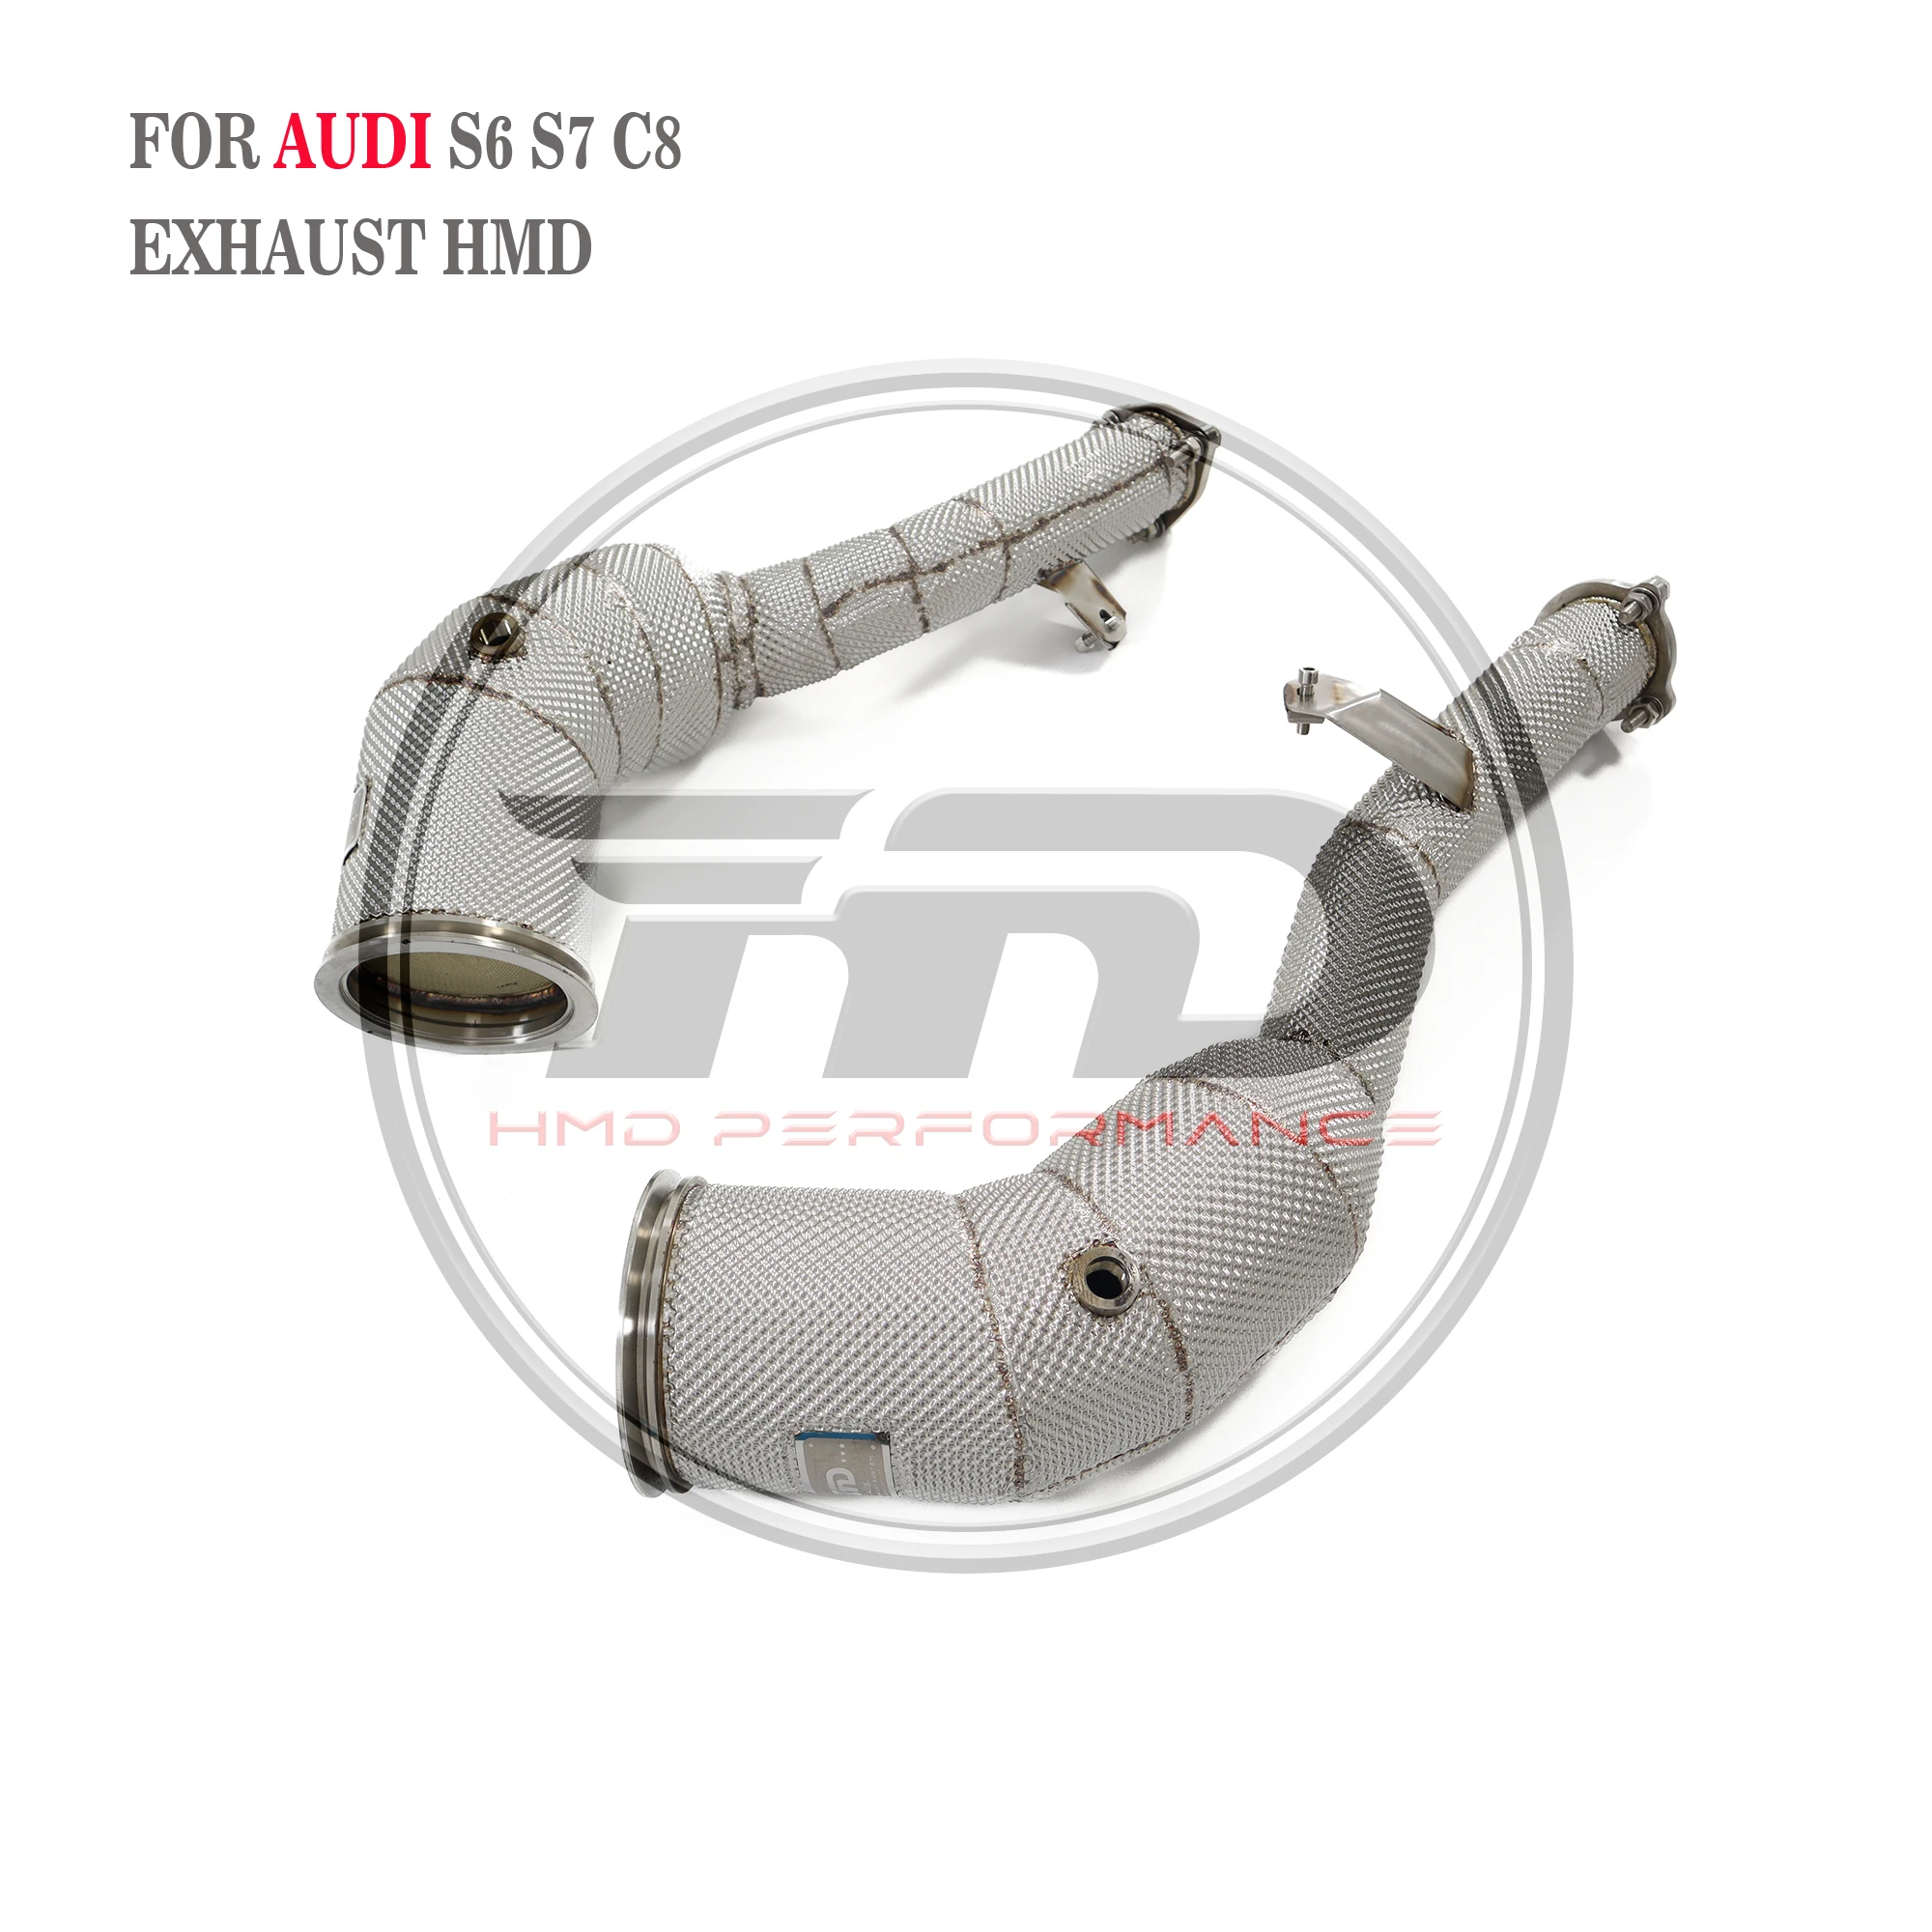 

HMD Exhaust System High Flow Performance Downpipe for Audi S6 S7 C8 2.9T 2020+ With Heat Shield Racing Pipe Non OPF Version